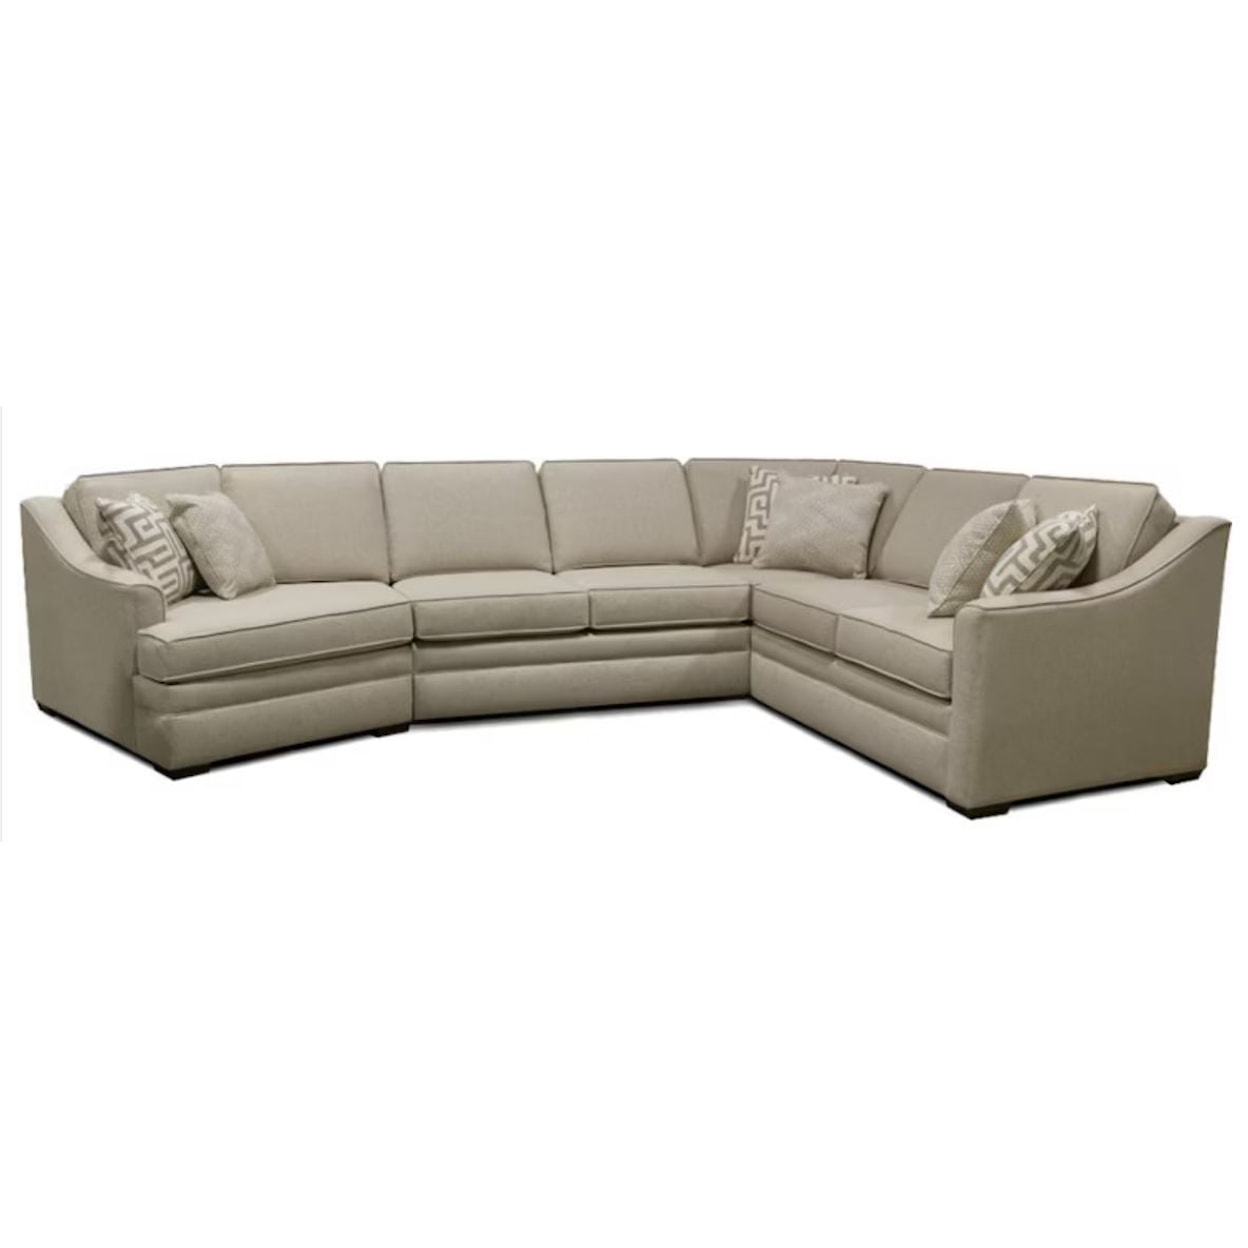 England Kendall Sectional